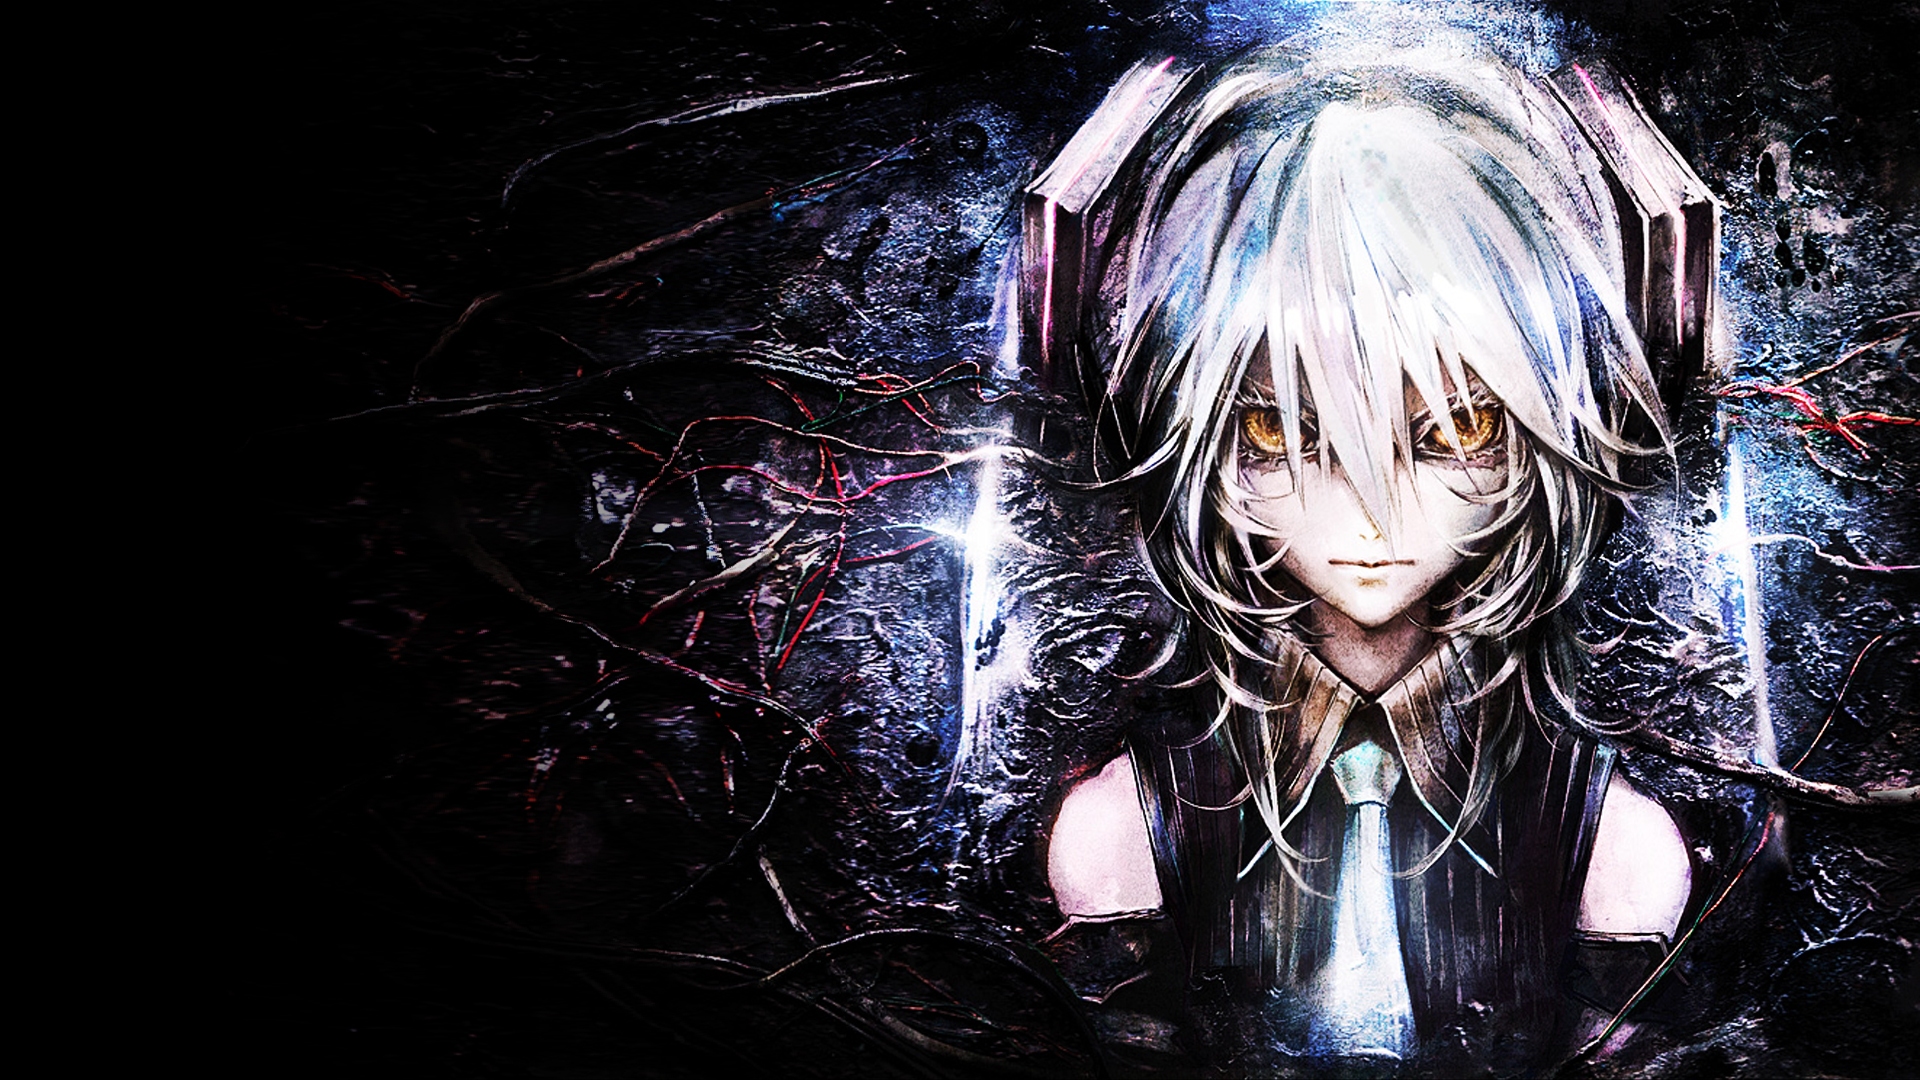 Cool And Amazing Anime Wallpaper Takedesigns